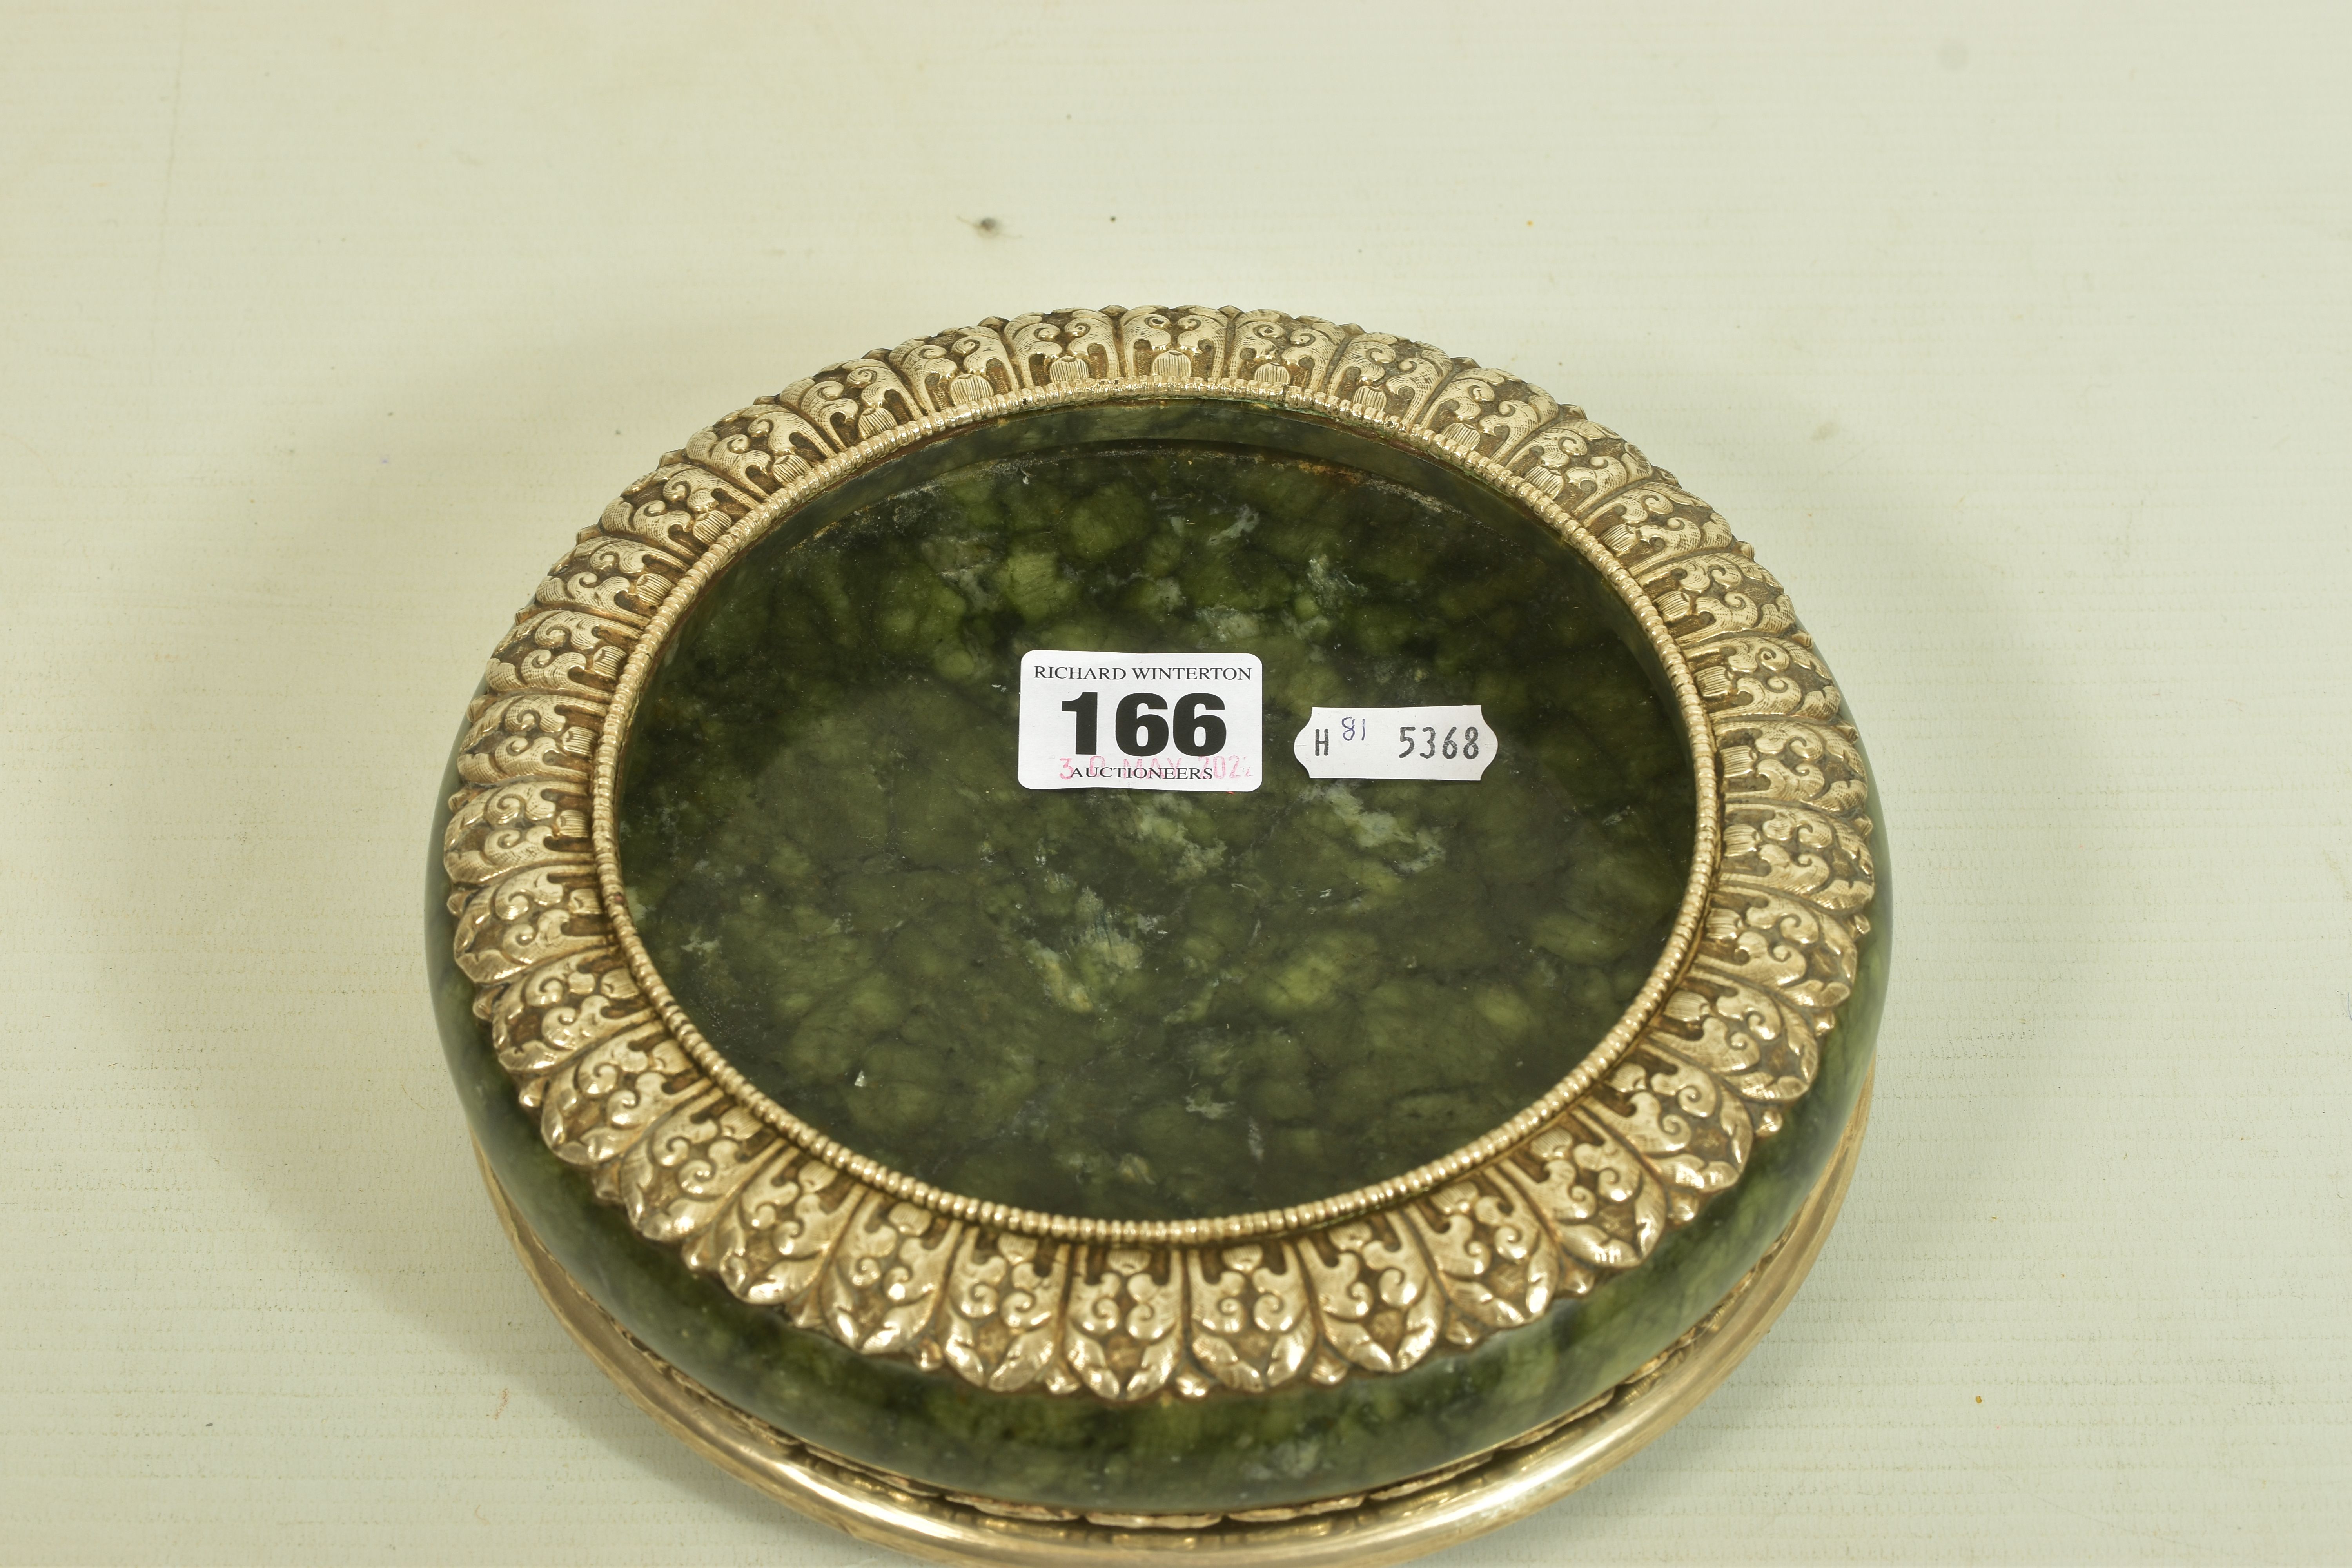 A WHITE METAL JADE BOWL AND STAND, believed to be 'Serpentine Jade,' with a white metal decorative